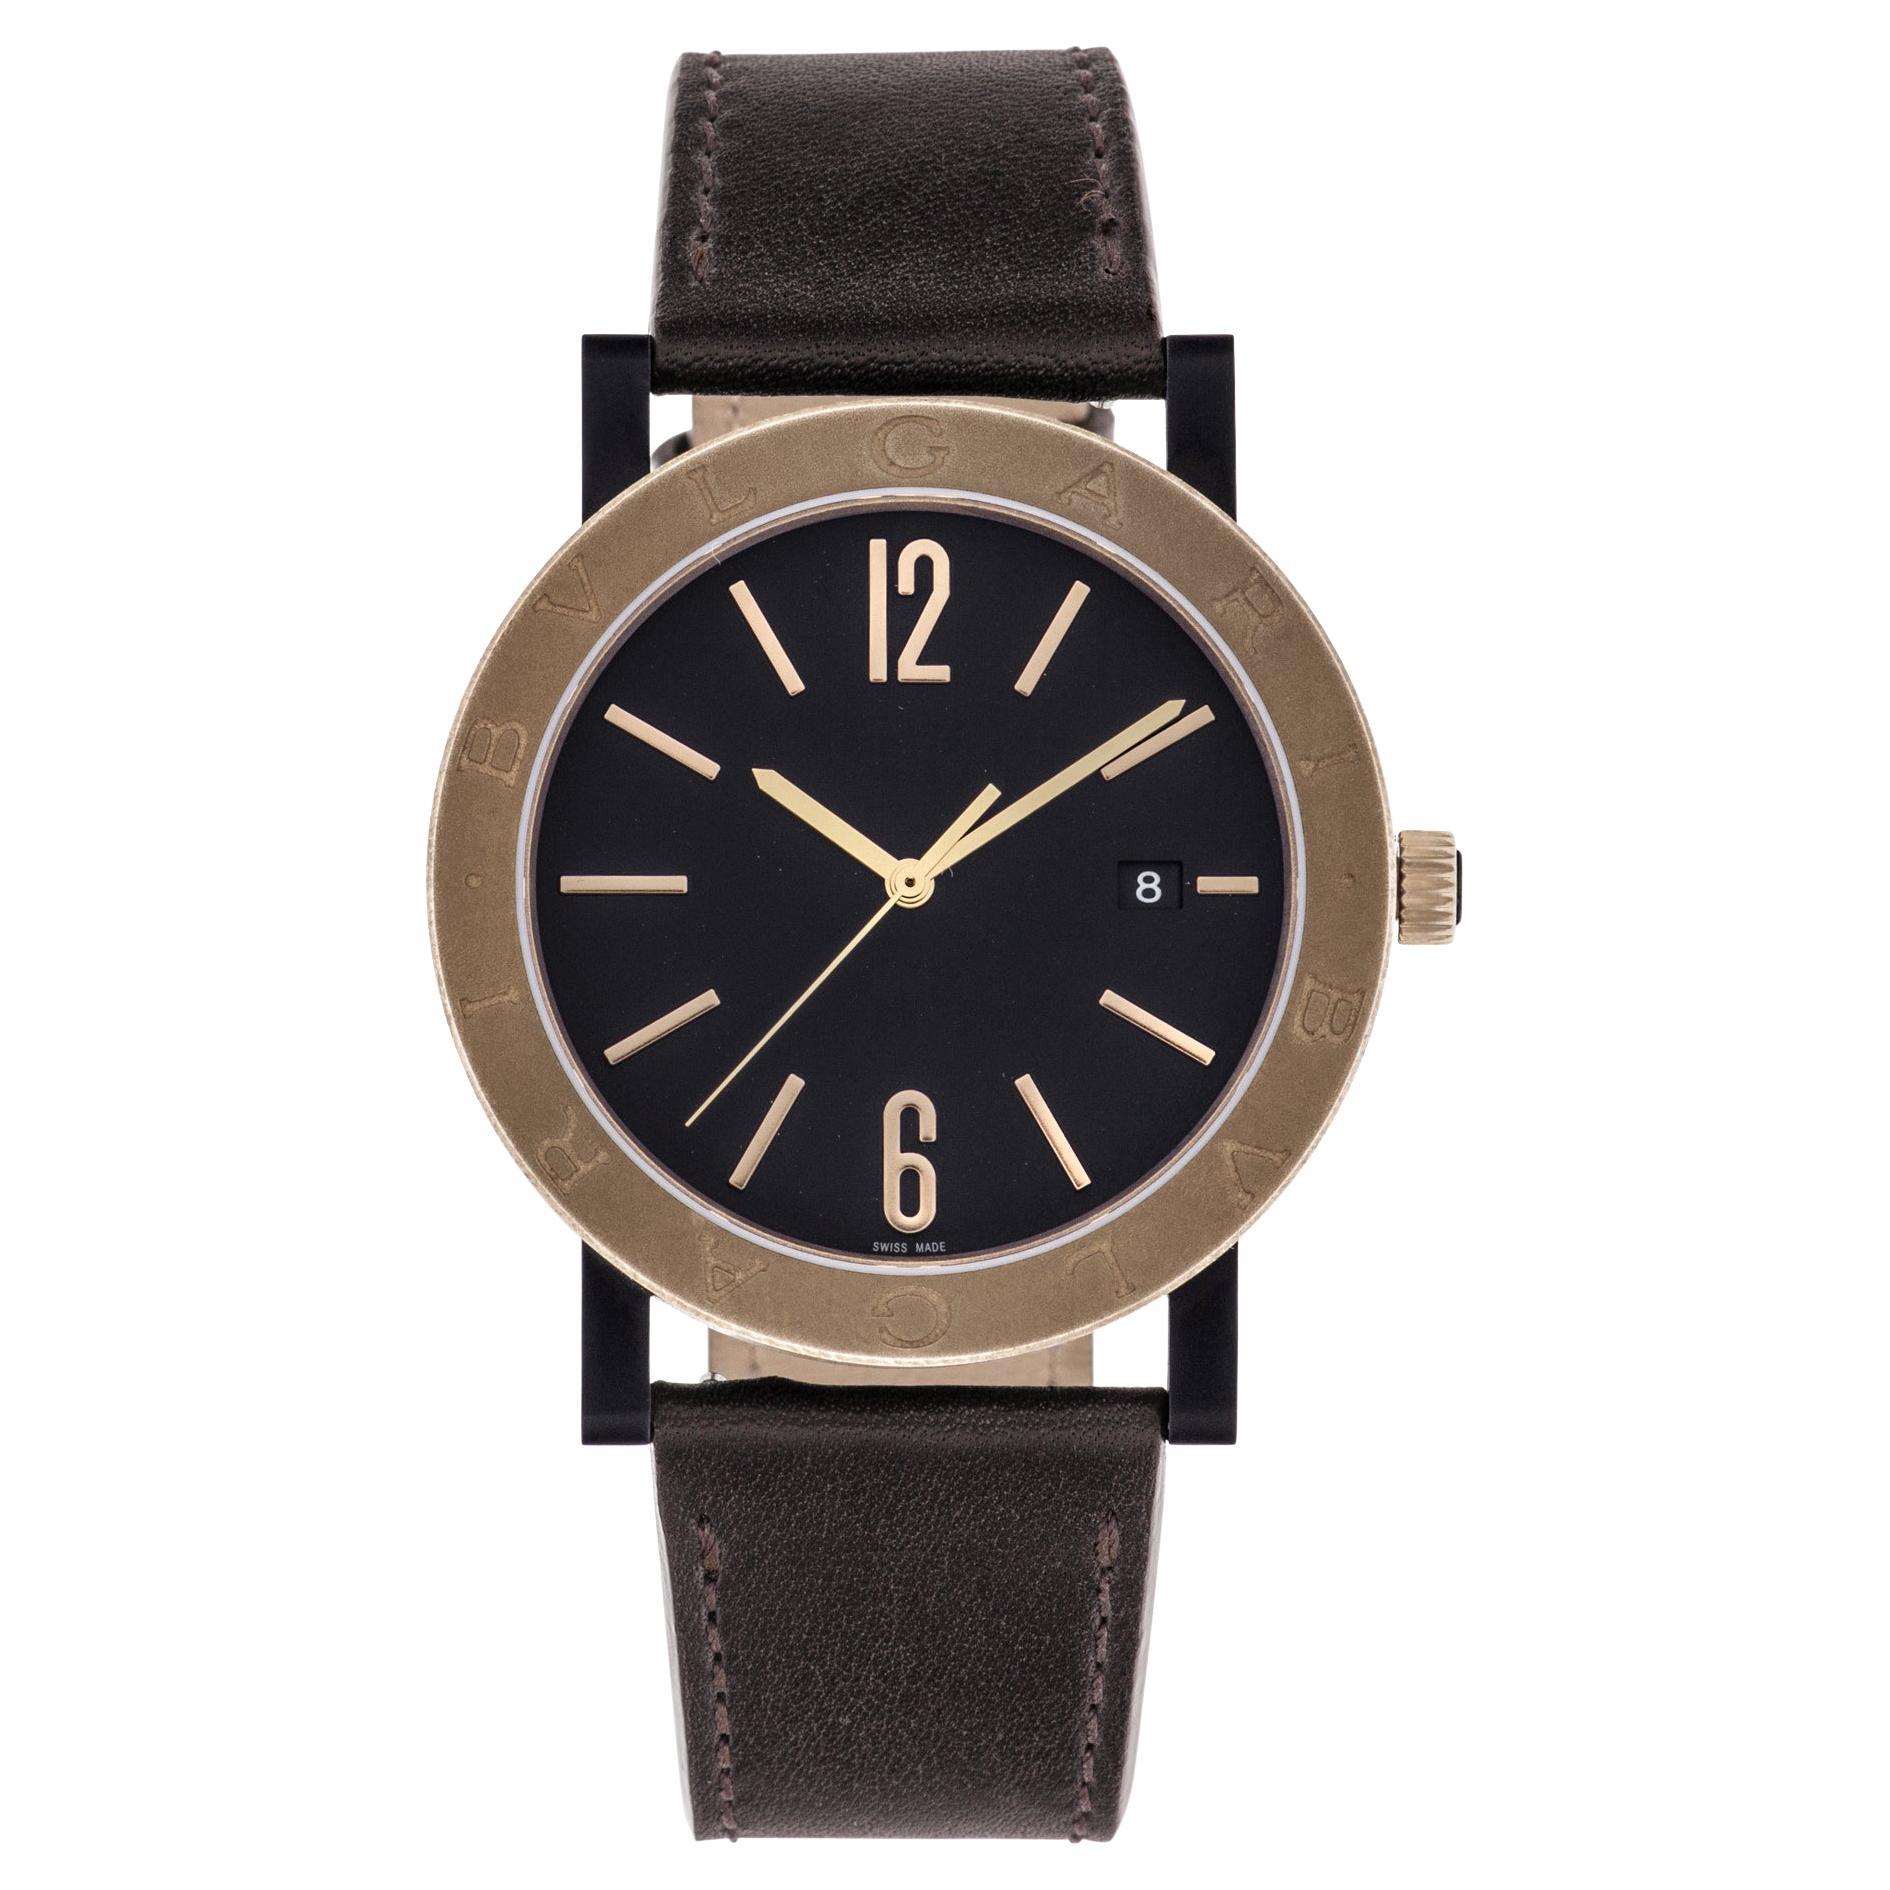 Bvlgari Solotempo BB41SB Steel Black Dial Automatic Watch For Sale